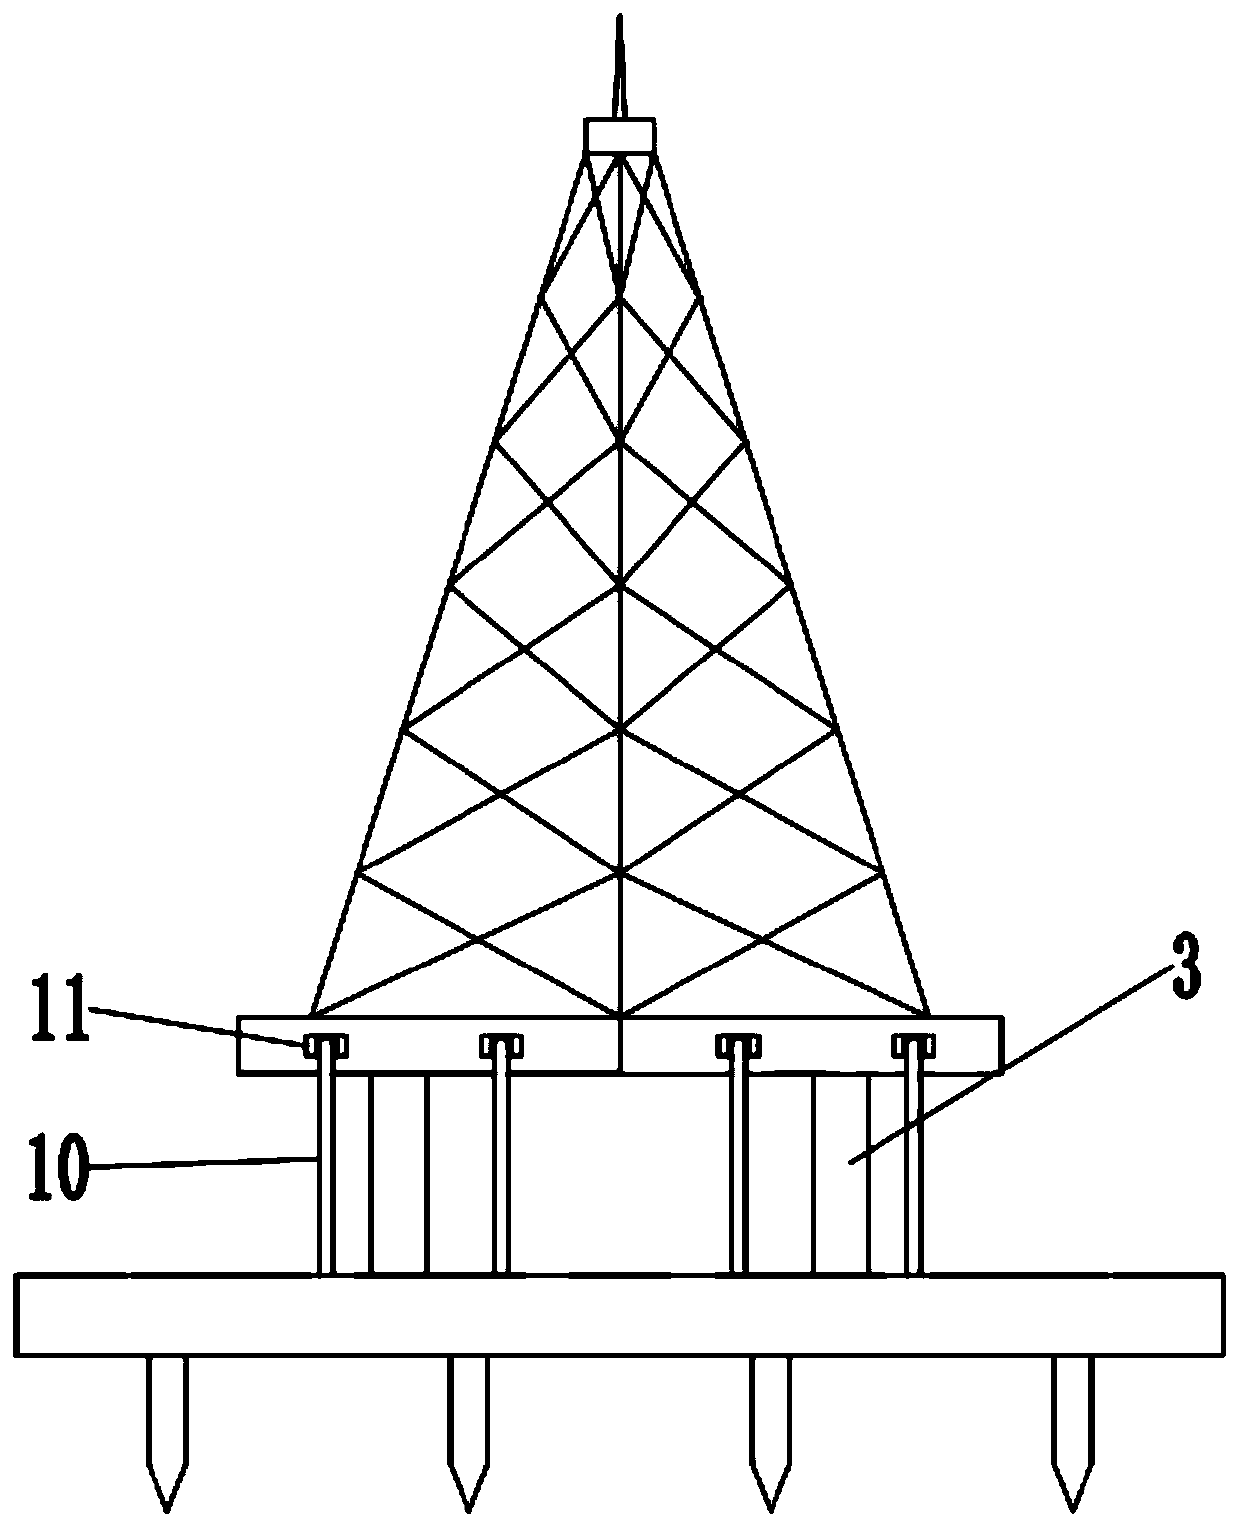 A seismic communication tower